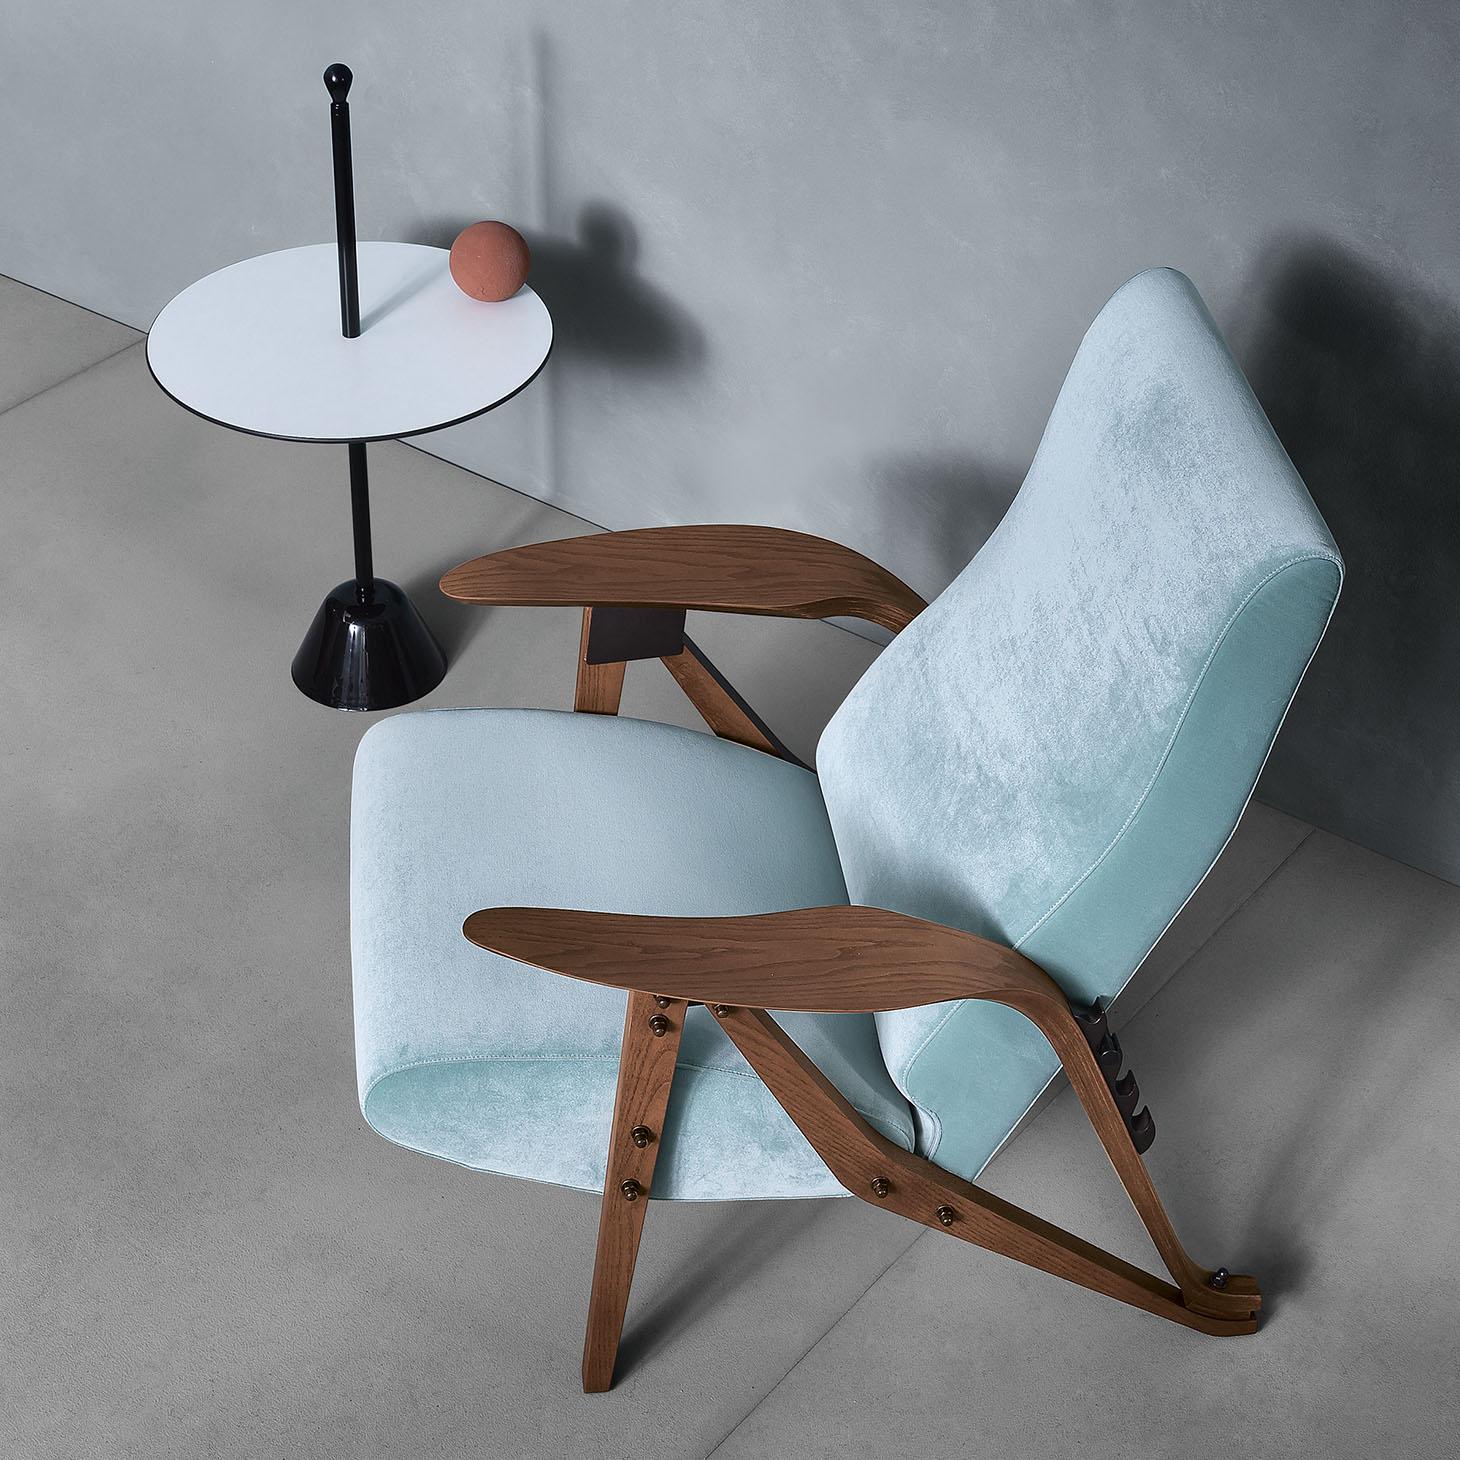 A reclining armchair with four positions, which represents Mollino's eclectic style, seeking ergonomics and comfort. 
Details and elegance: shaped solid wood and a single element that joins the legs and the cozy armrest, similar to a leaf, large